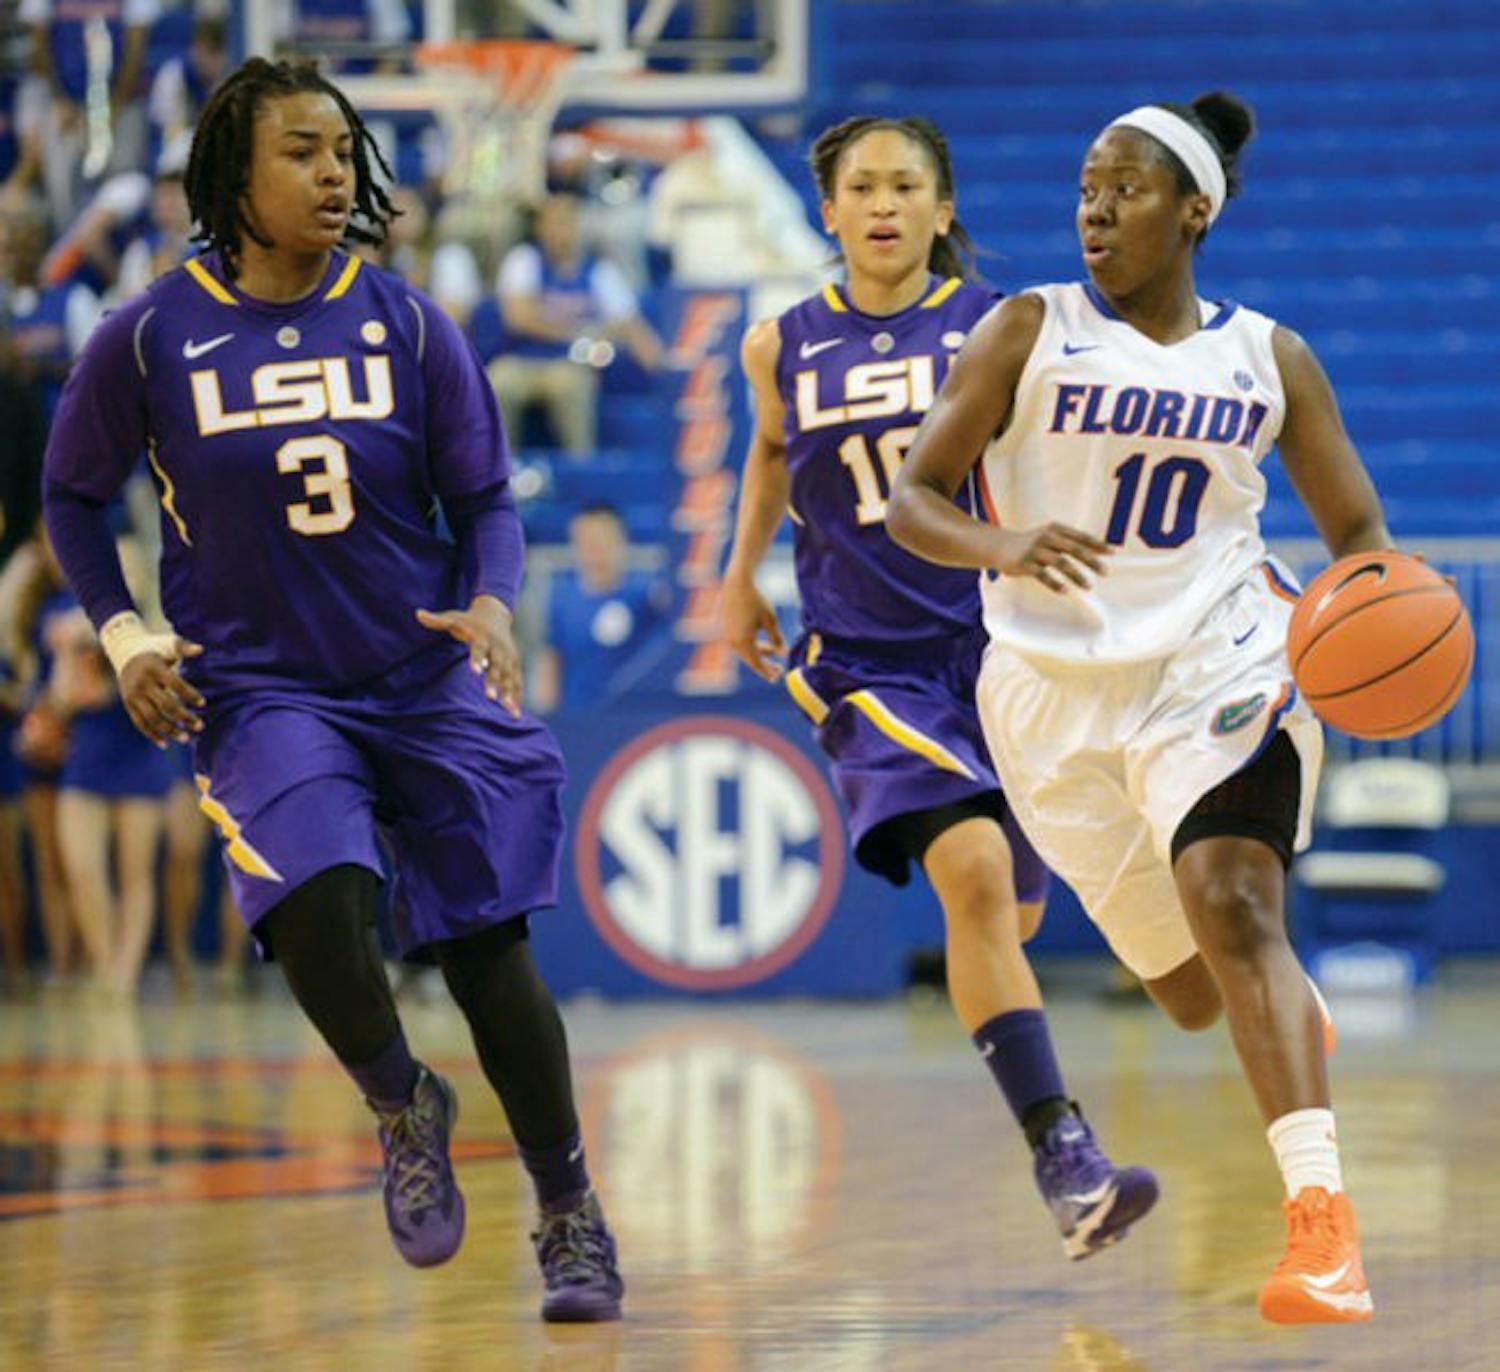 Jaterra Bonds (10) runs the floor during Florida’s 77-72 win against LSU on Jan. 6 in the O’Connell Center. Bonds is Florida’s leading scorer returning from last season.